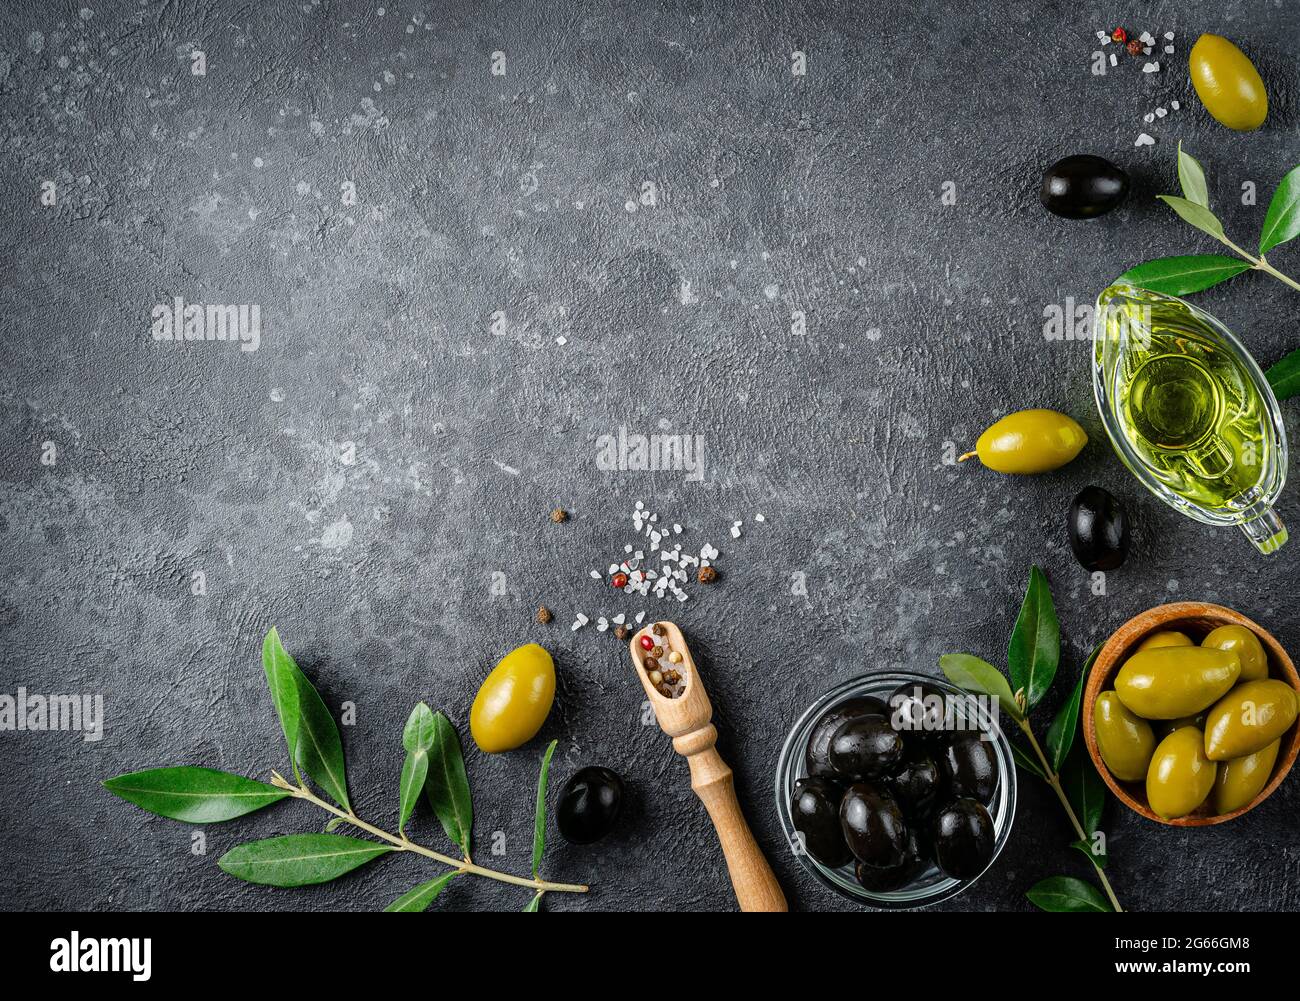 Food border background of green and black olives with branches. Top view, copy space. Stock Photo